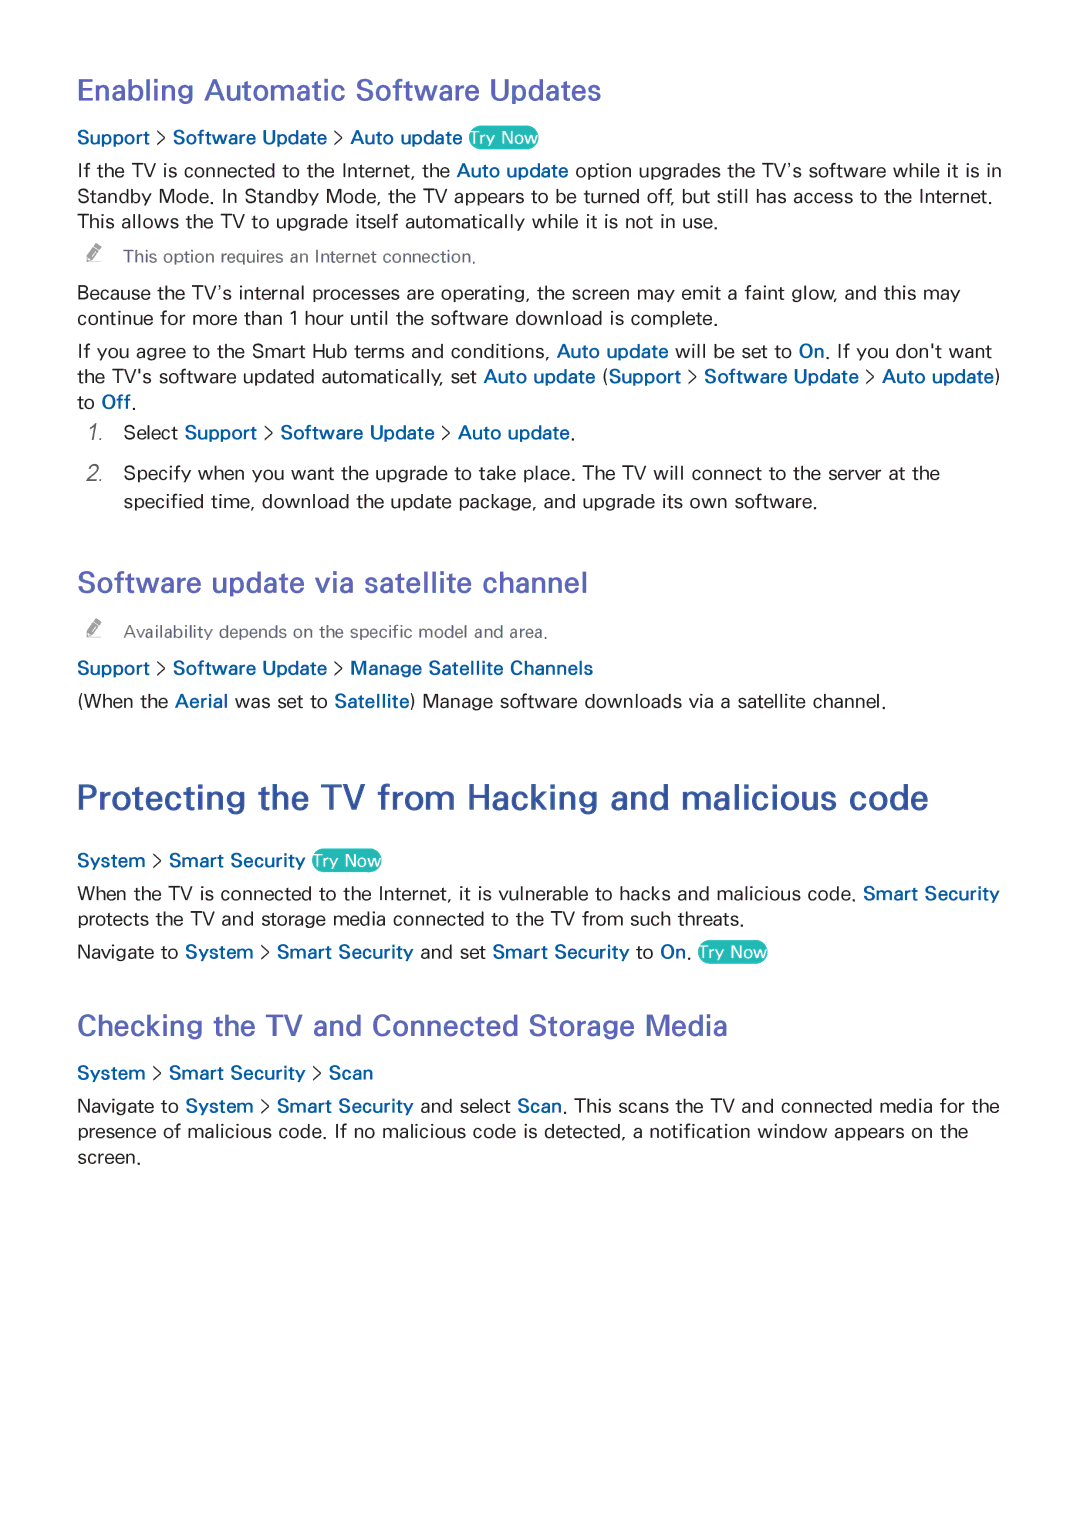 Samsung UE48H6750SVXZG manual Protecting the TV from Hacking and malicious code, Enabling Automatic Software Updates 